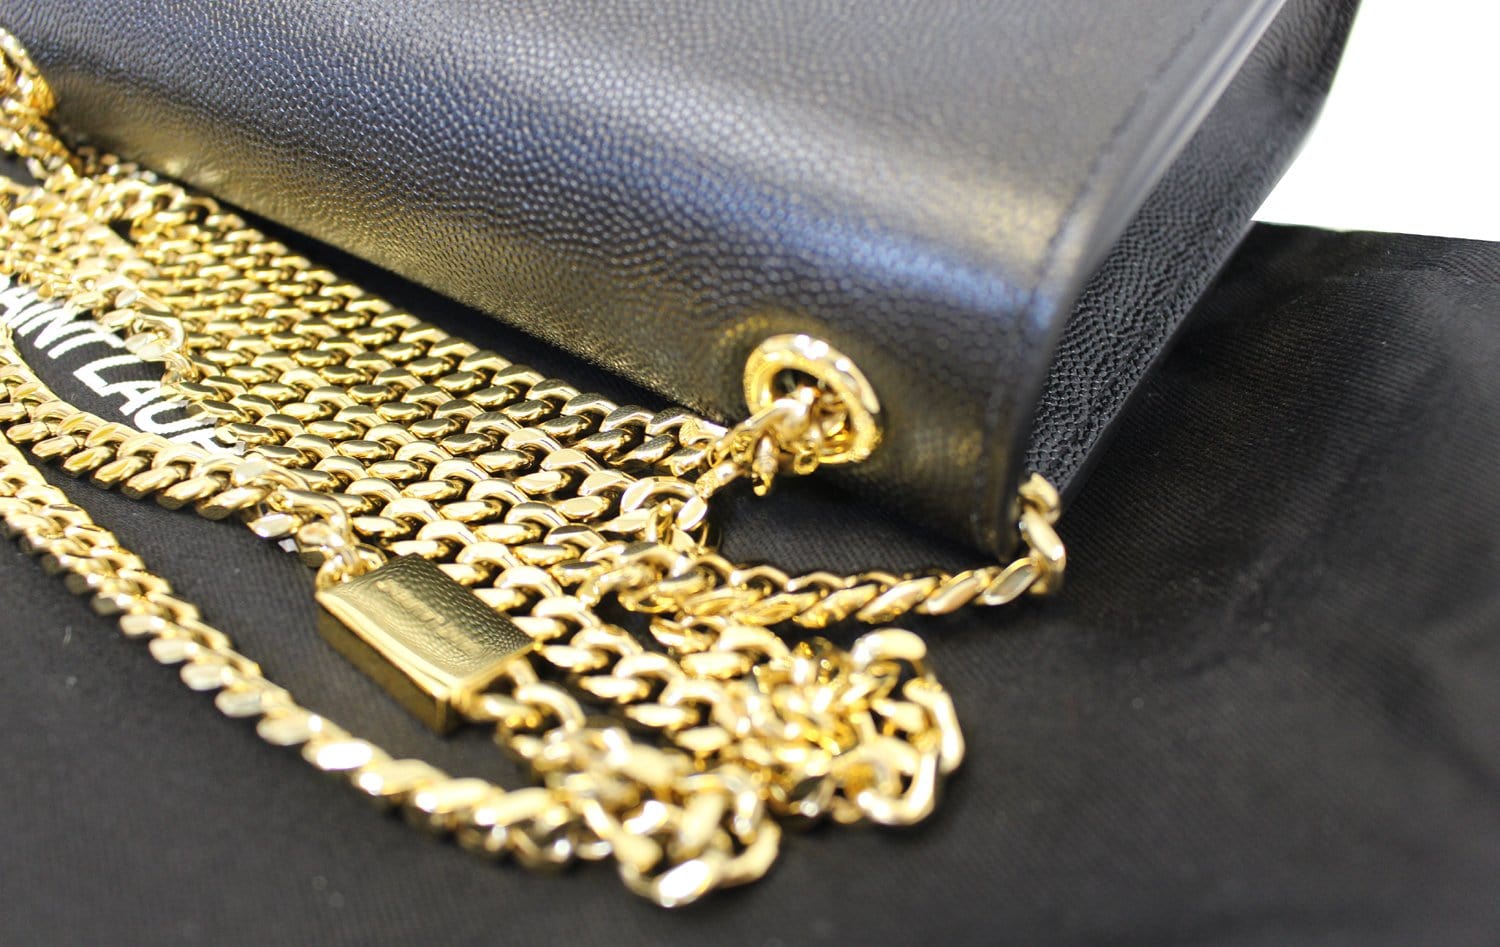 Céline Black Clutch With Gold Chain ○ Labellov ○ Buy and Sell Authentic  Luxury